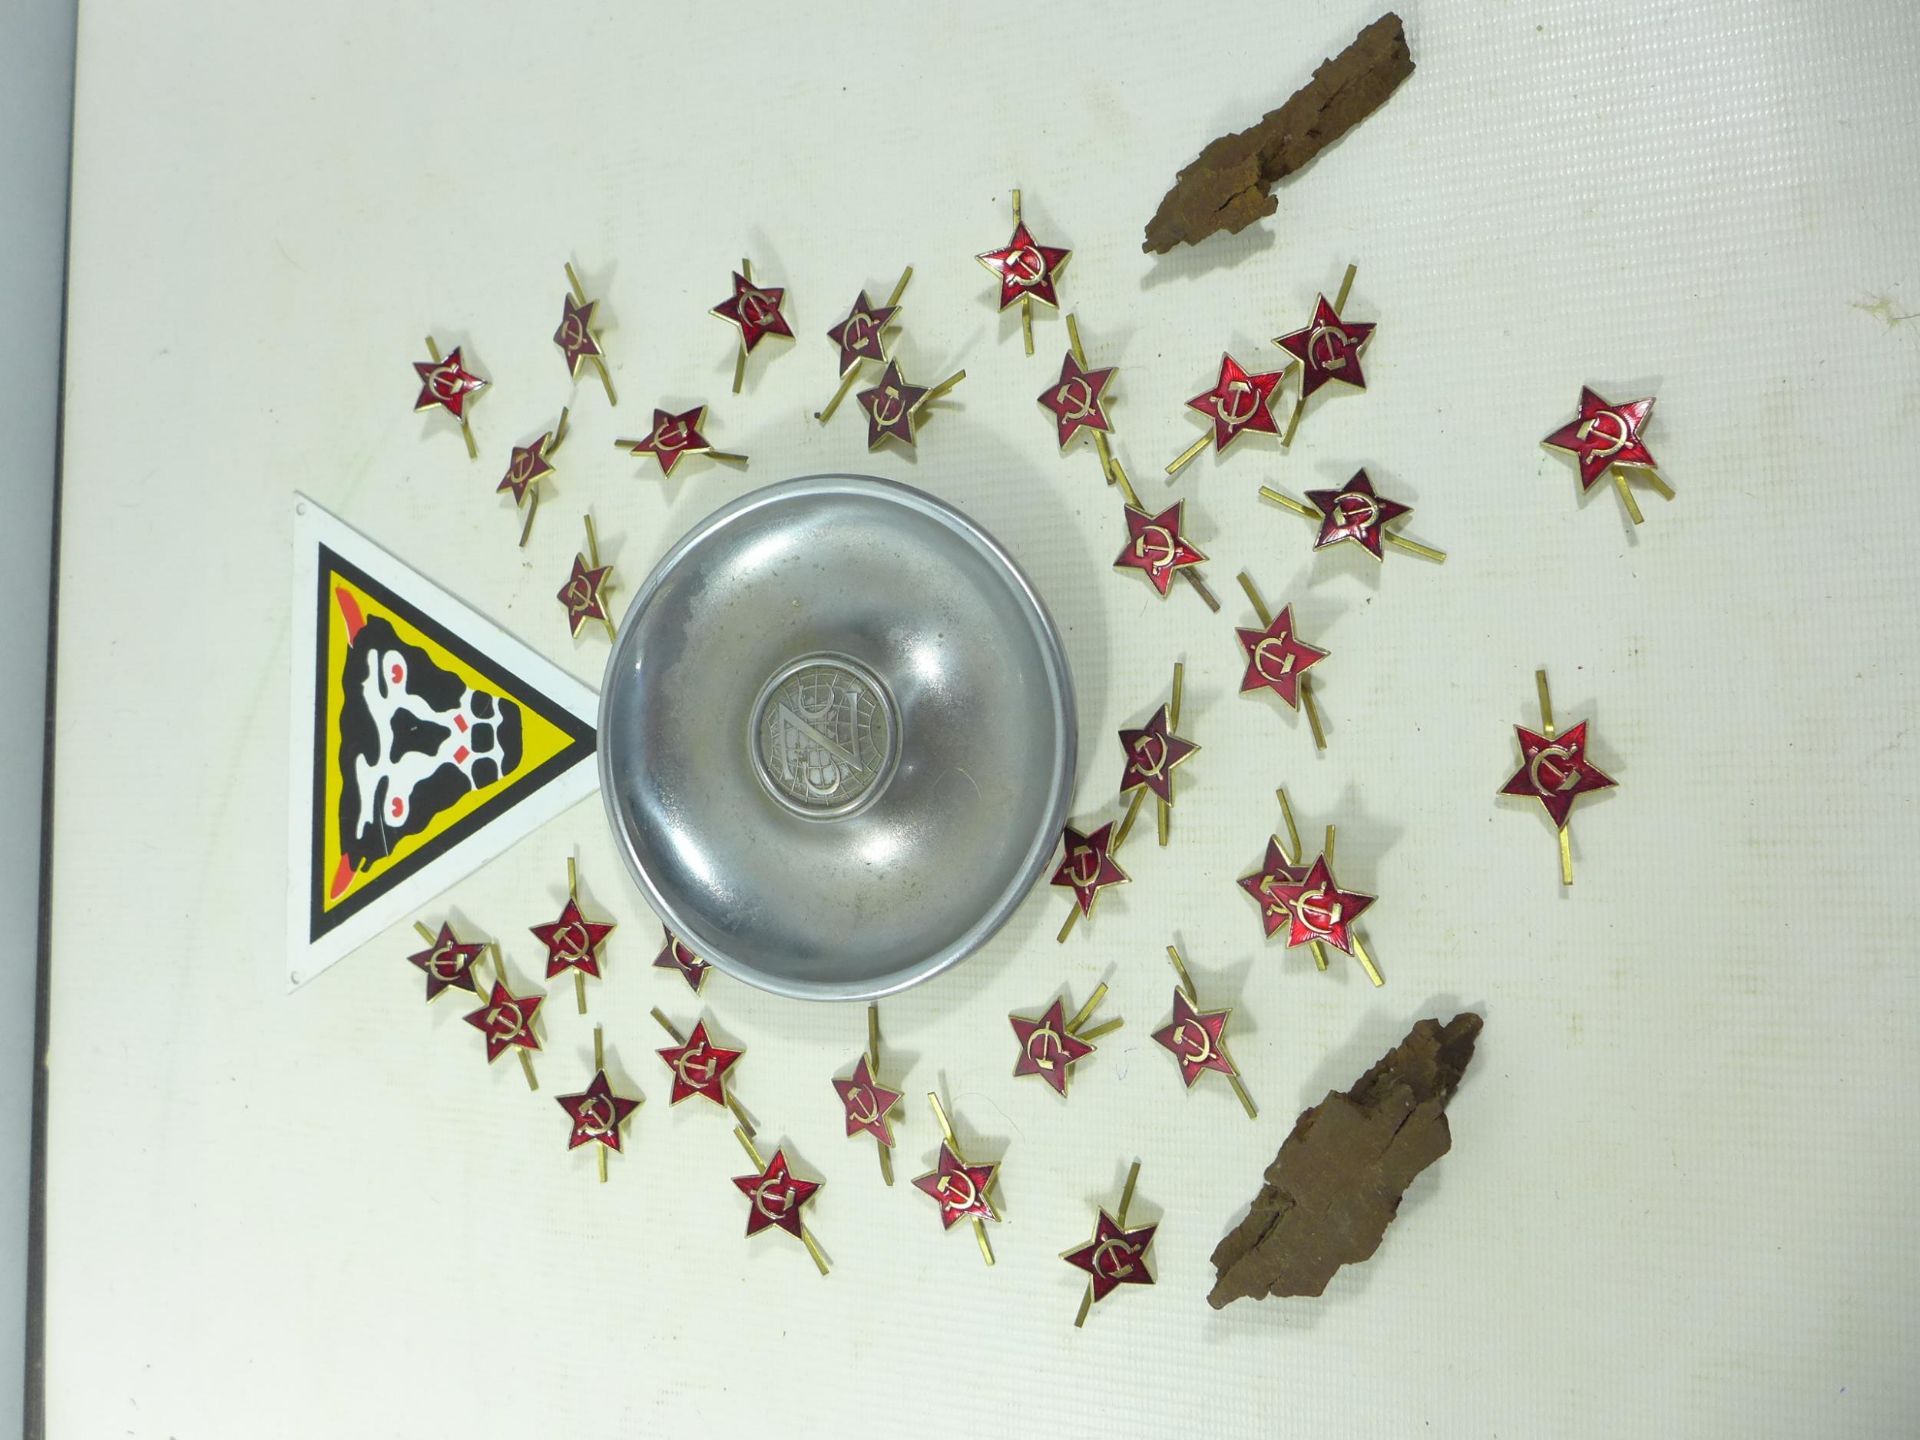 A LARGE COLLECTION OF ENAMEL HAMMER AND SYCLE BADGES, TWO BITS OF SHRAPNEL, CAST MAZAK ZINK ALLOY